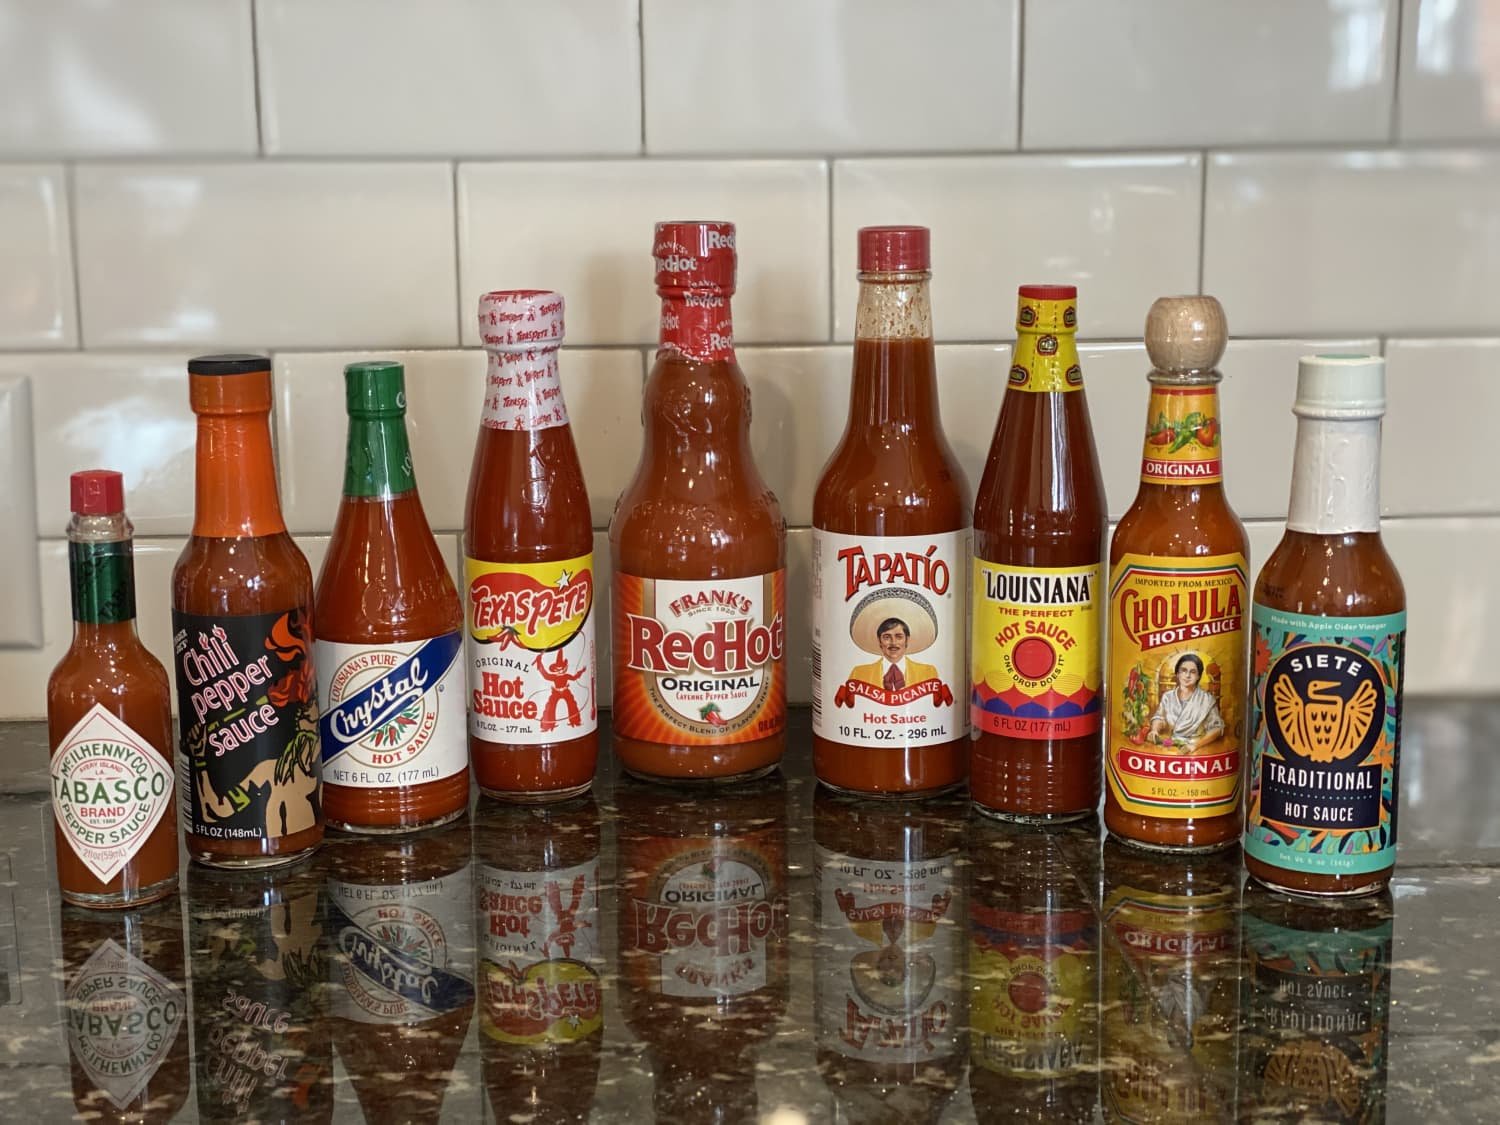 I Tried 9 Bottles of Hot Sauce and These Were Clearly The Best